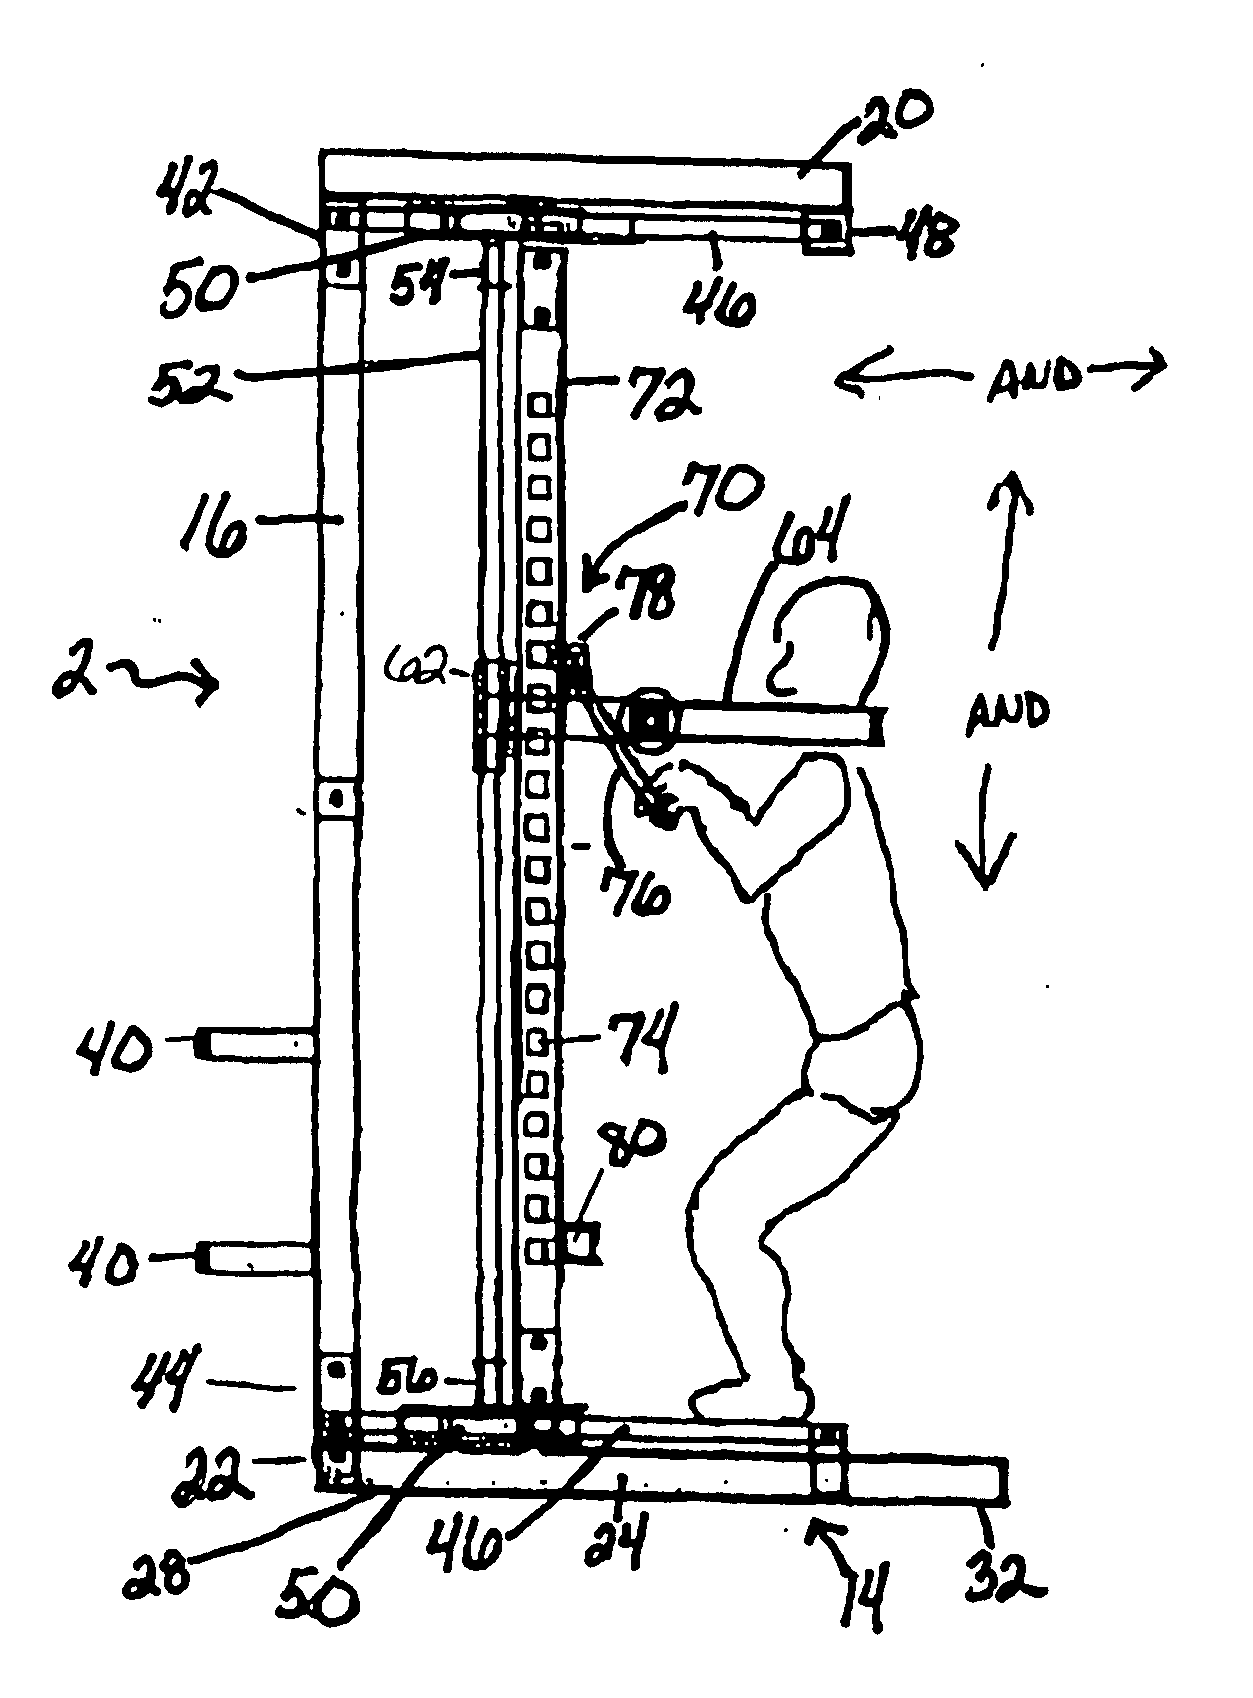 Standing weightlifting apparatus